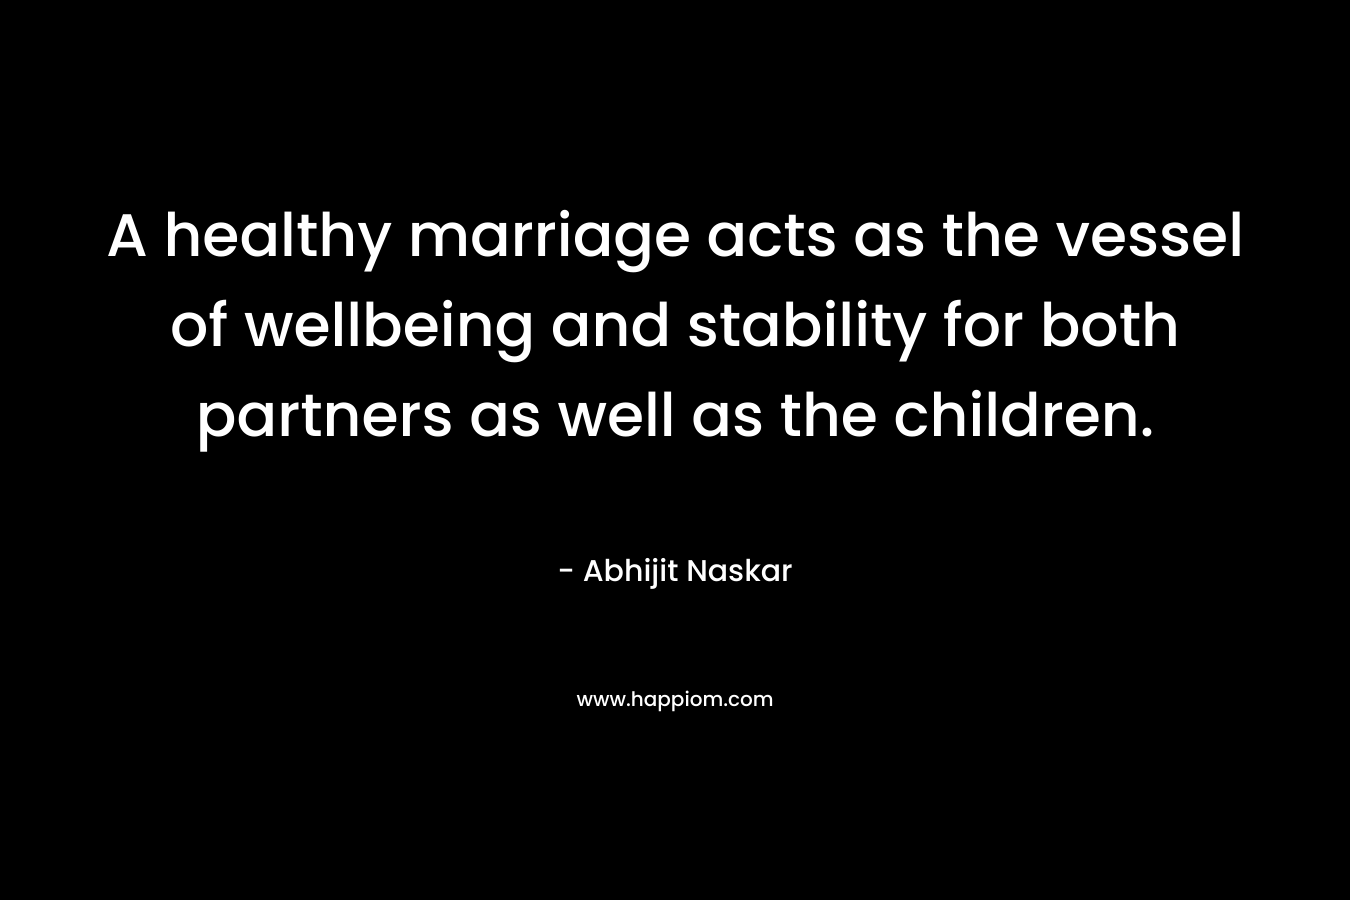 A healthy marriage acts as the vessel of wellbeing and stability for both partners as well as the children.